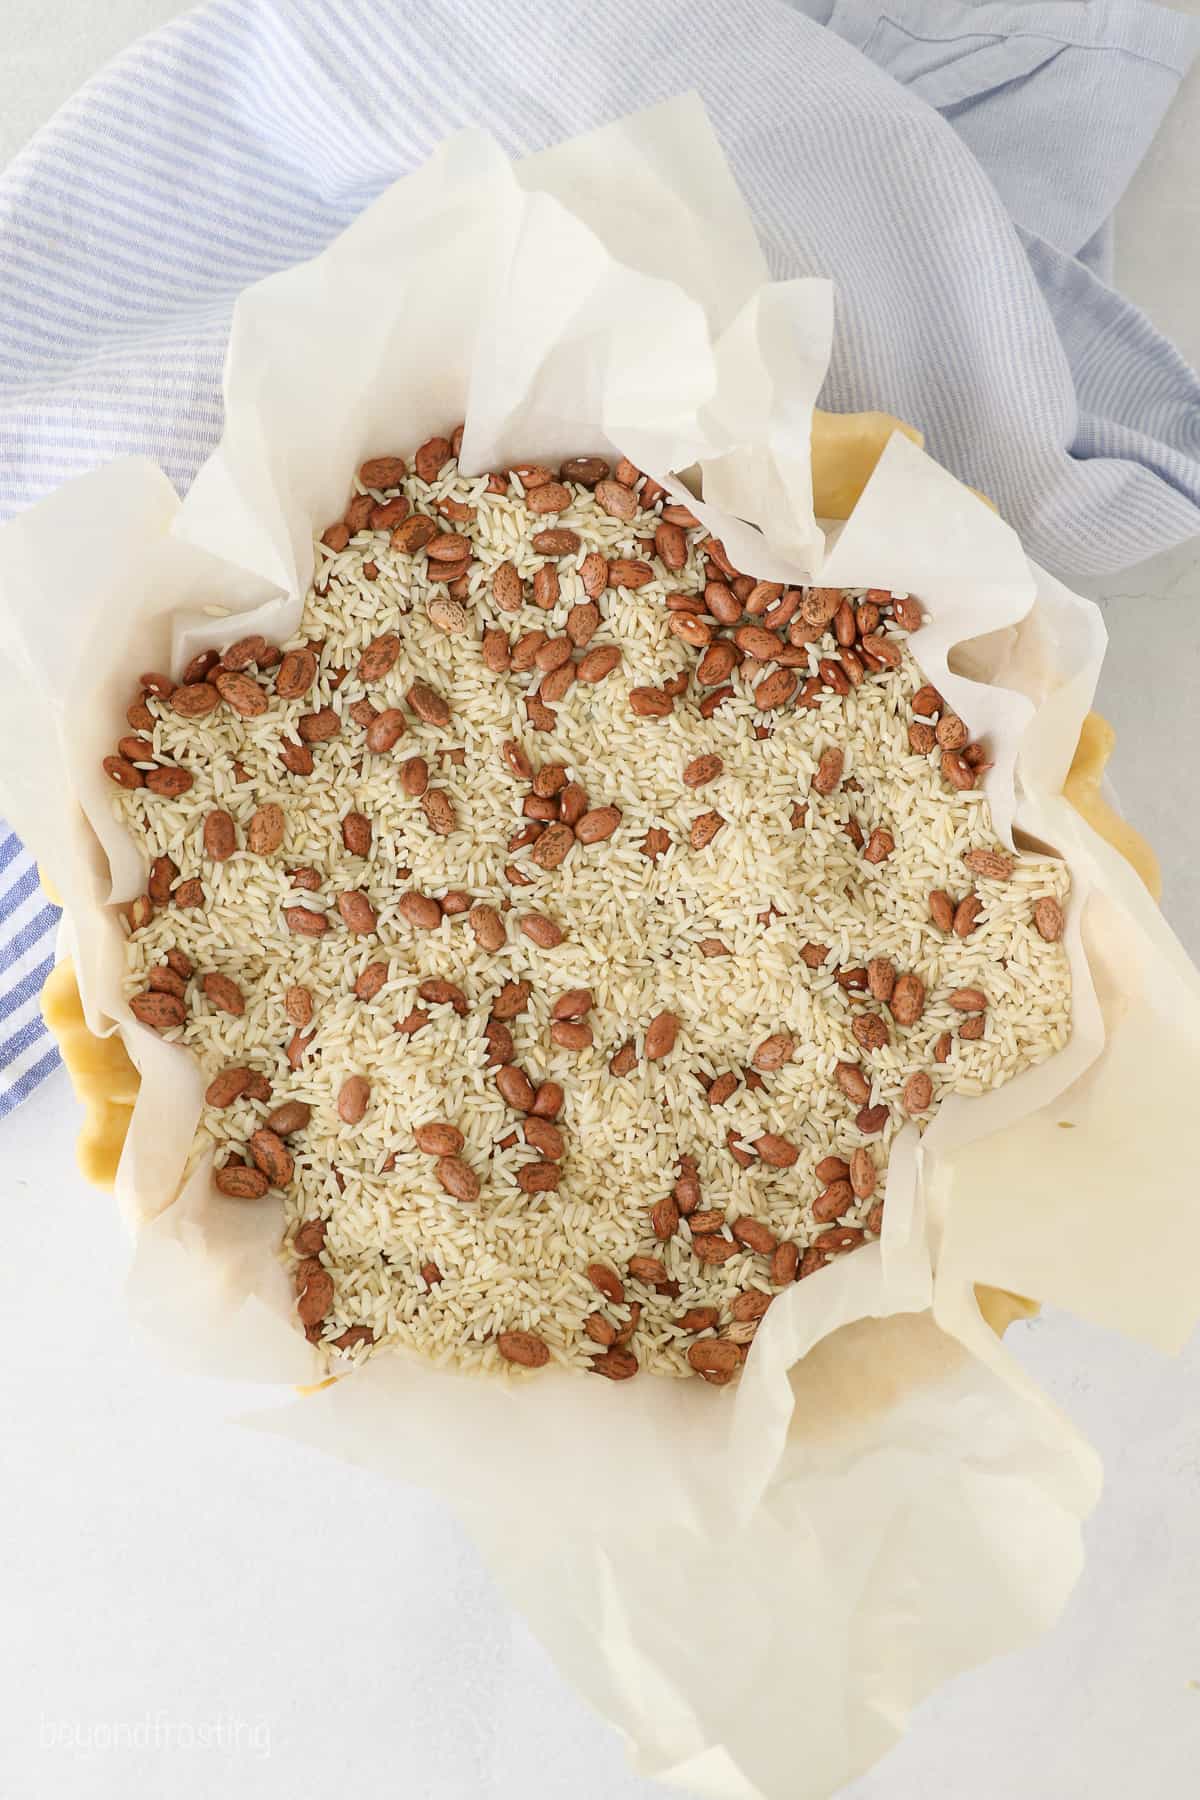 Overhead view of a pie crust lined with parchment paper filled with dry rice and beans as pie weights.